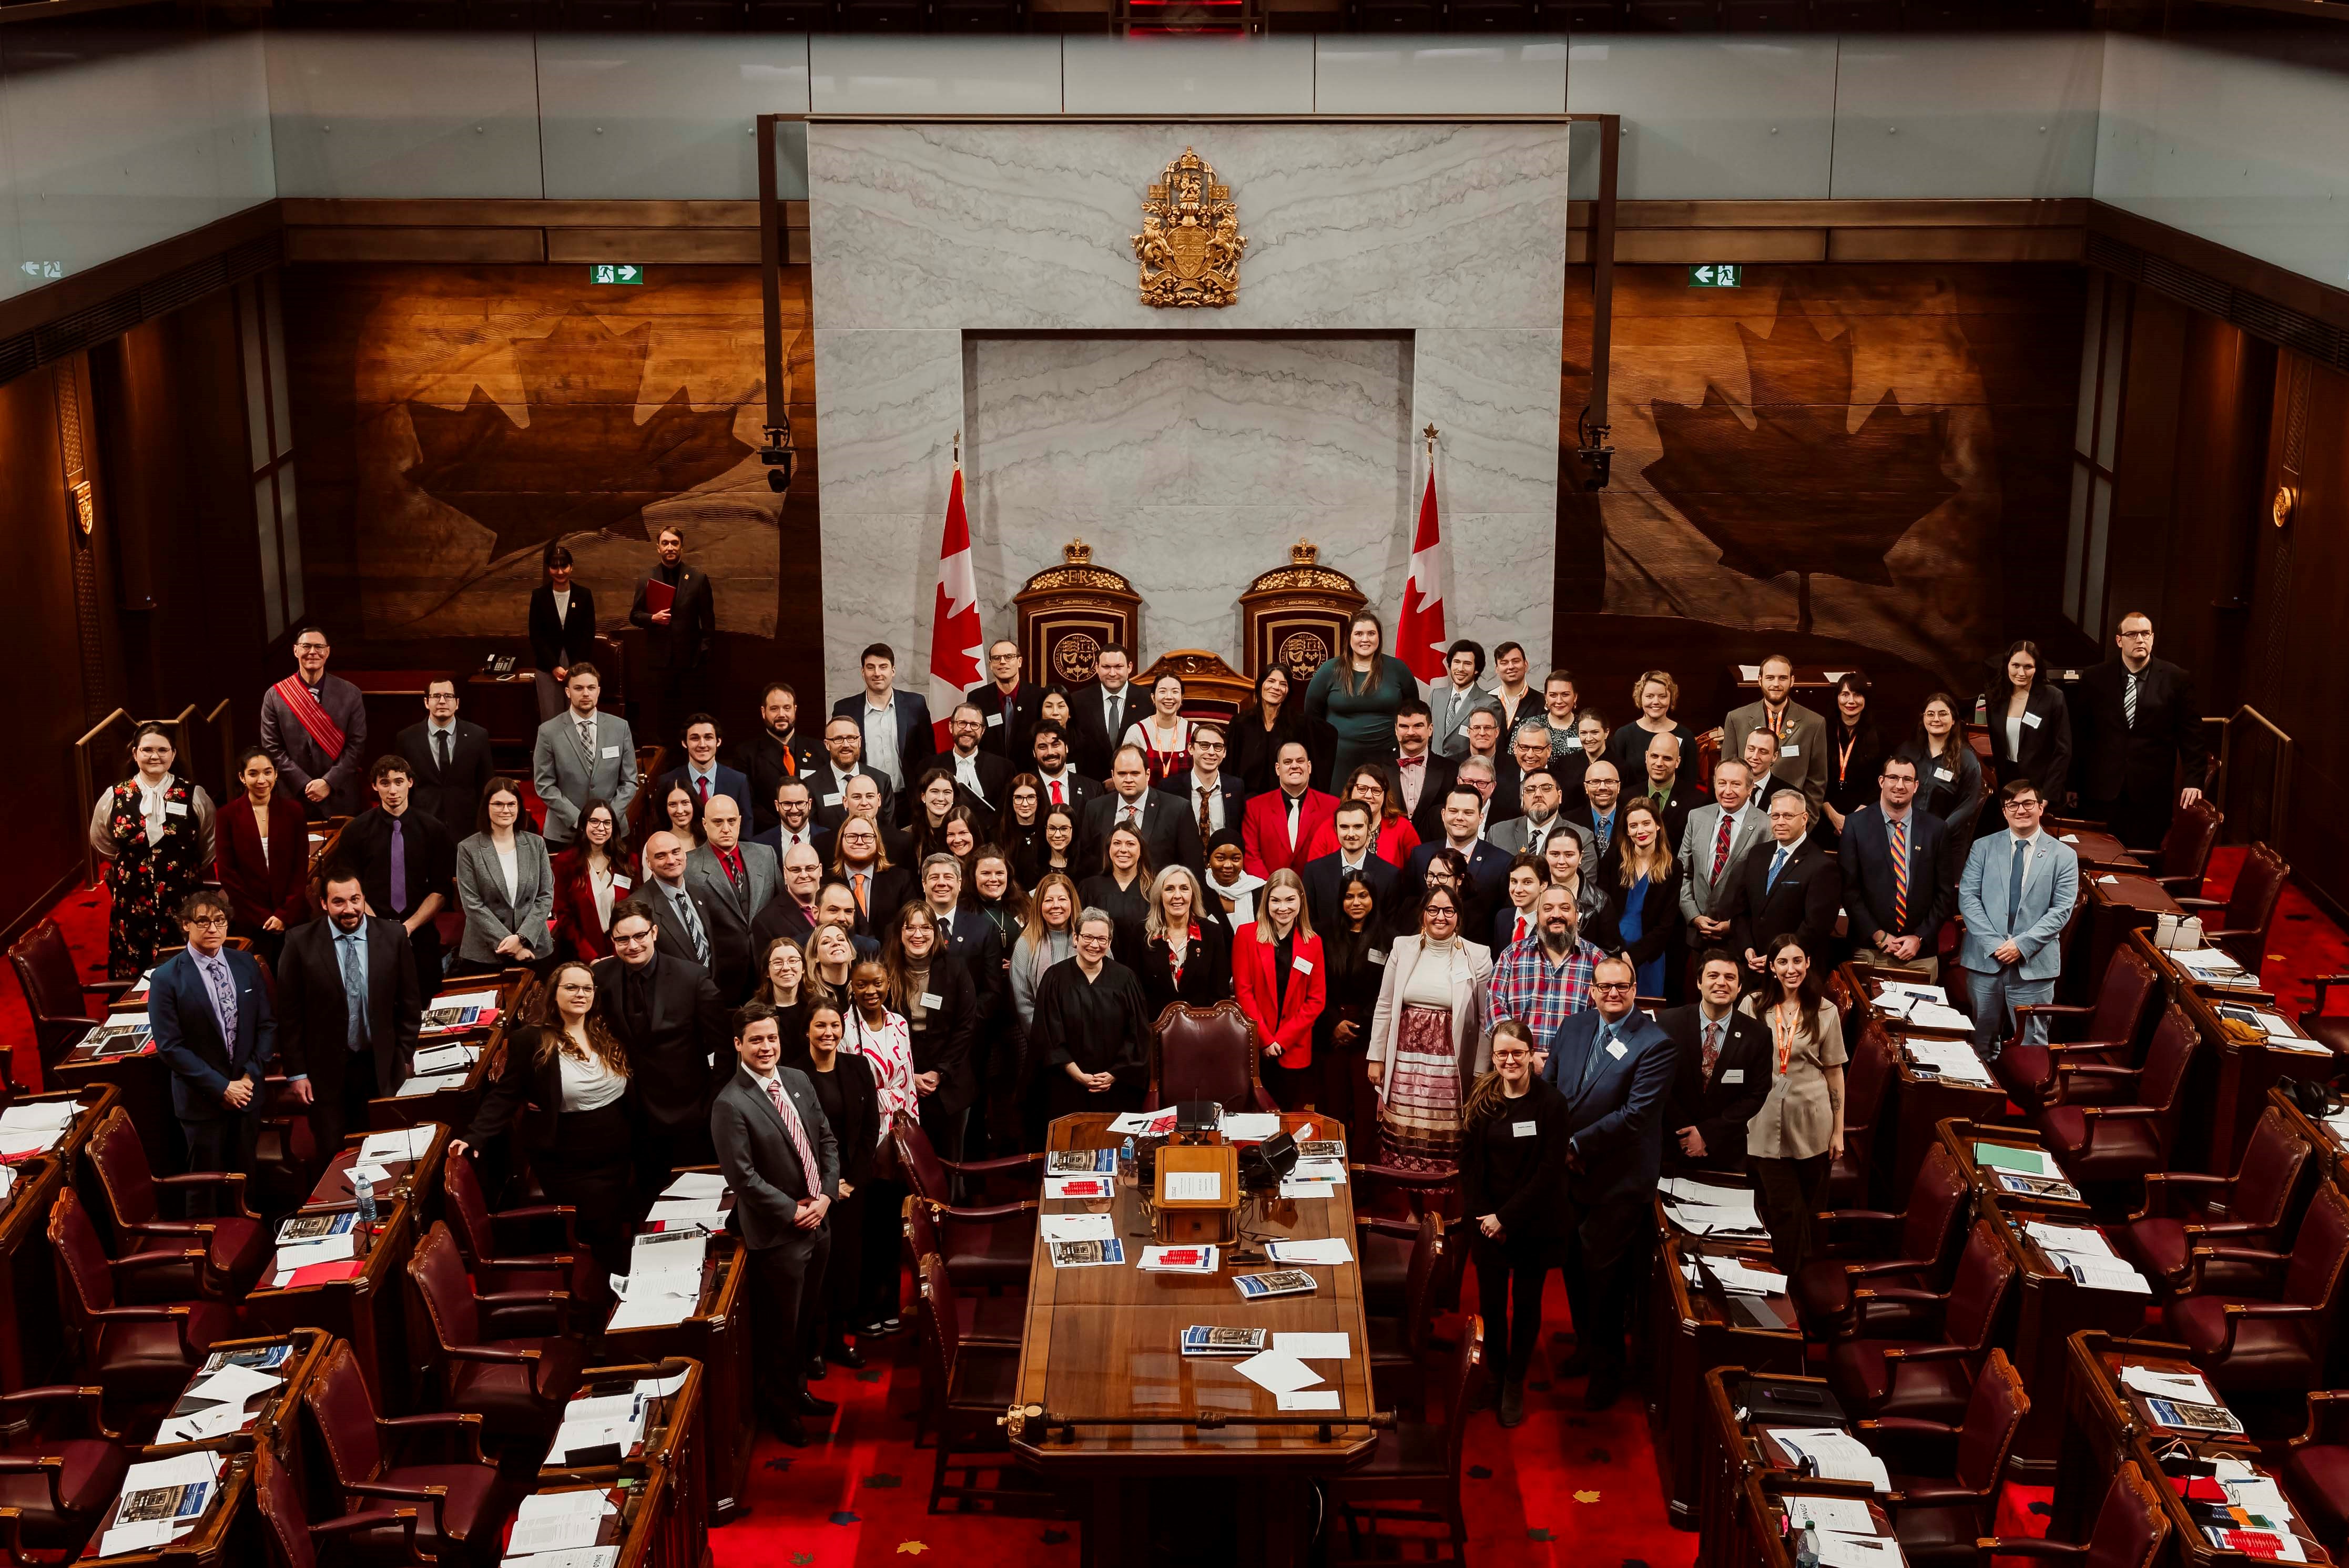 Saturday, January 27, 2024 – Senator Rebecca Patterson, centre; participating in the role of governor general in Laurentian University’s Model Parliament alongside students and alumni, coordinated by SENgage; Senate Chamber, Senate of Canada Building, Ottawa, Ontario. Photo credit: Laurentian University